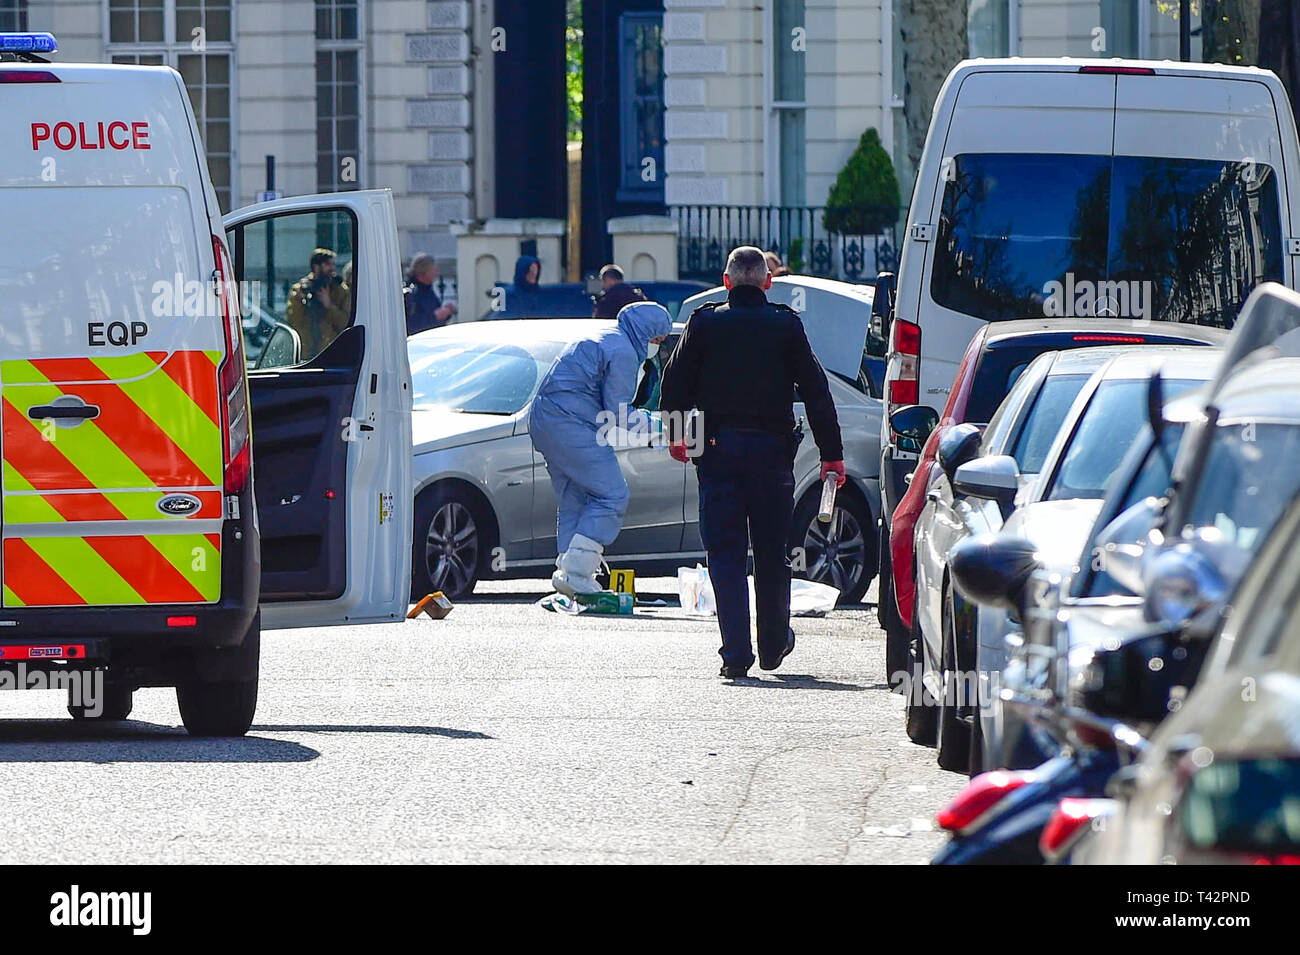 London, UK.  13 April 2019.  The scene in Holland Park Avenue, west London, where it is reported police opened fire on a vehicle outside the Ukrainian embassy after the car repeatedly rammed into the official car of the country's UK ambassador.  A man in his 40s has been arrested.  No injuries have occured and police have said that the incident is not terror-related.  Credit: Stephen Chung / Alamy Live News Stock Photo